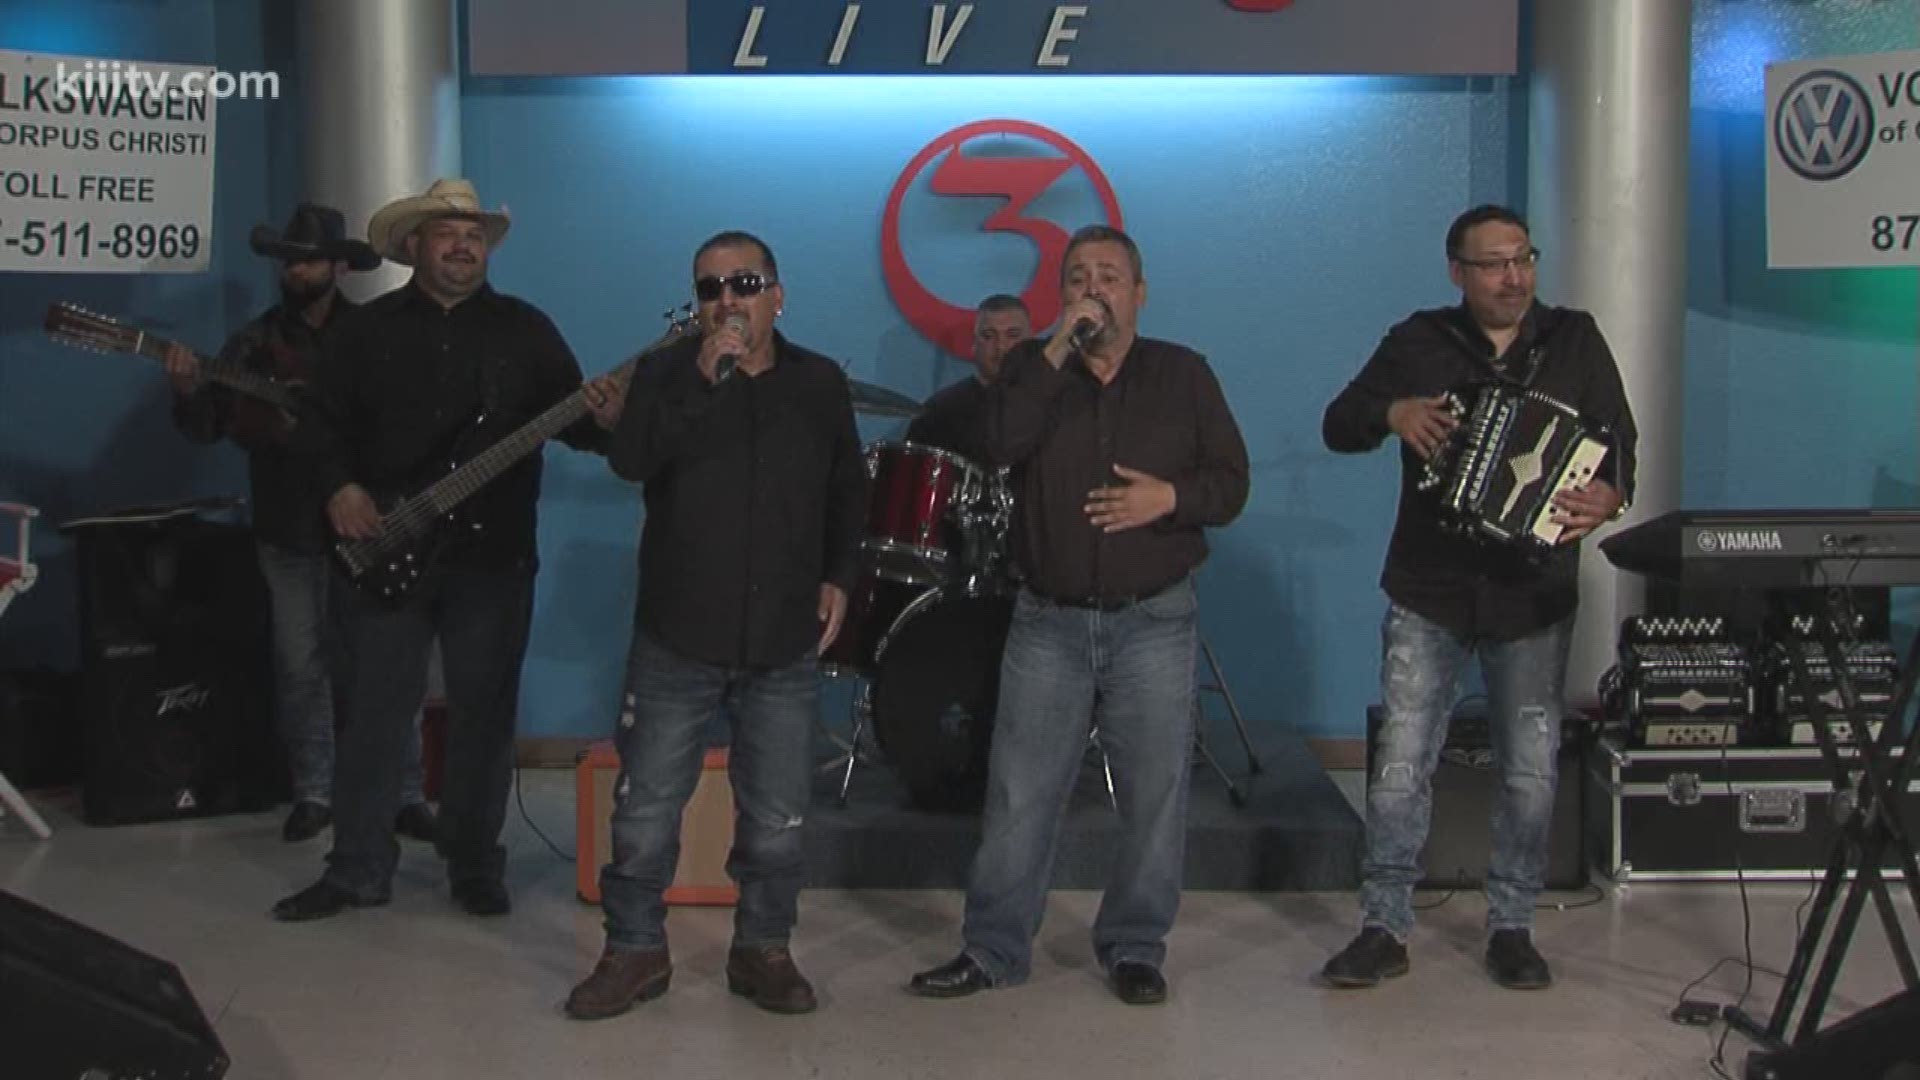 Tejano Highway 281 Performing "Buckle Up and Crank It Up" on Domingo Live.